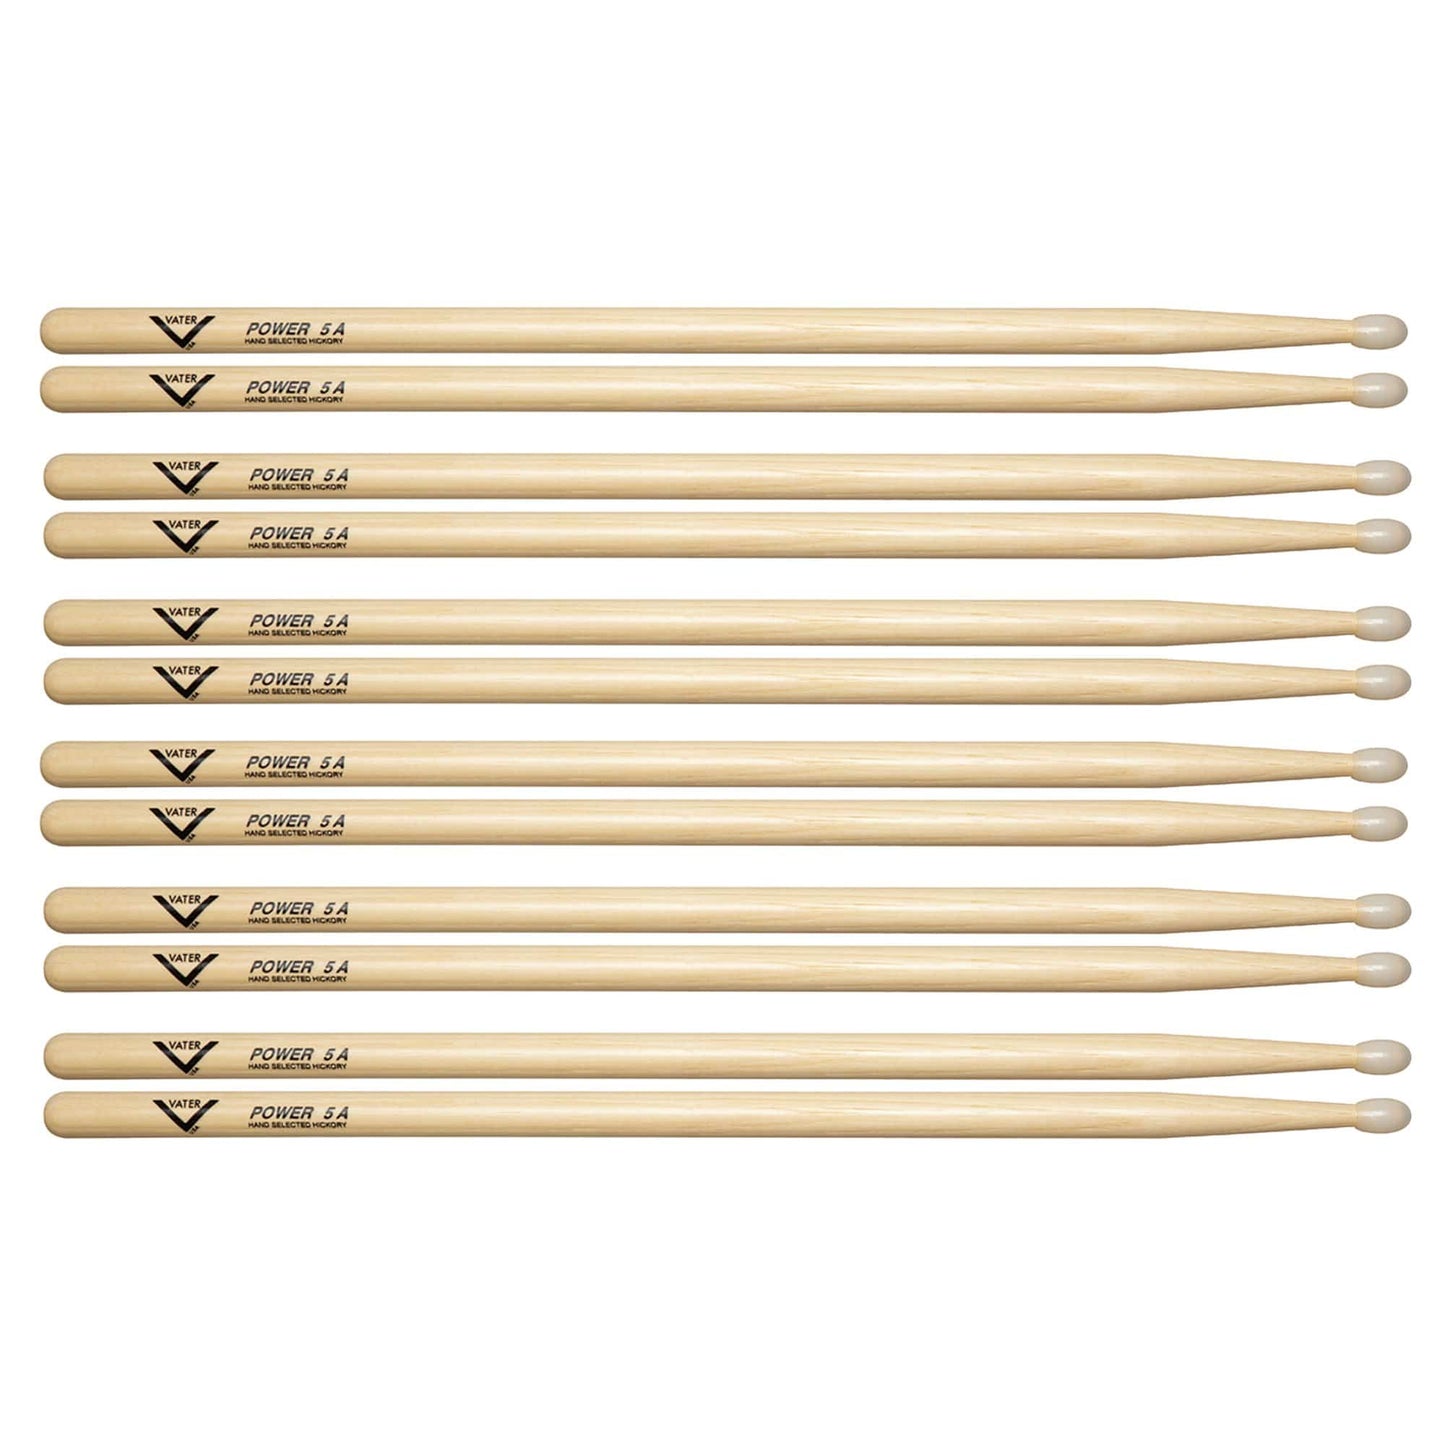 Vater Hickory Power 5A Nylon Tip Drum Sticks (6 Pair Bundle) Drums and Percussion / Parts and Accessories / Drum Sticks and Mallets